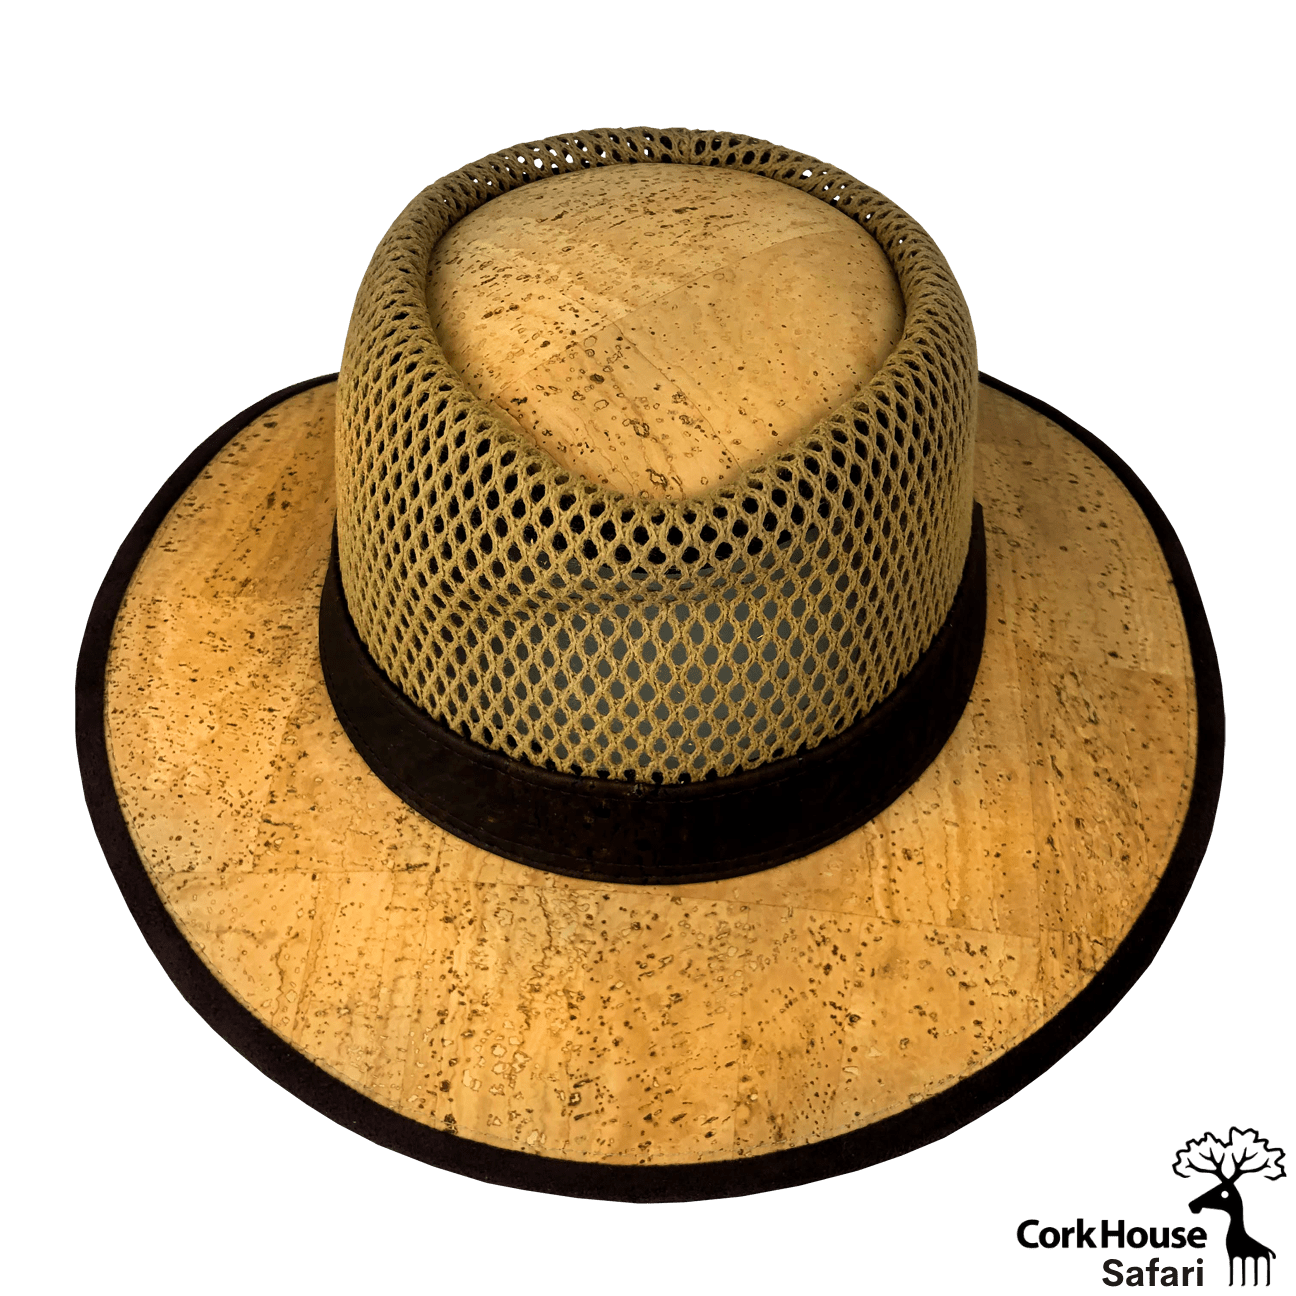 A view front of the cork safari hat highlighting the wicker crown and dark brown cork brim binding and rim.